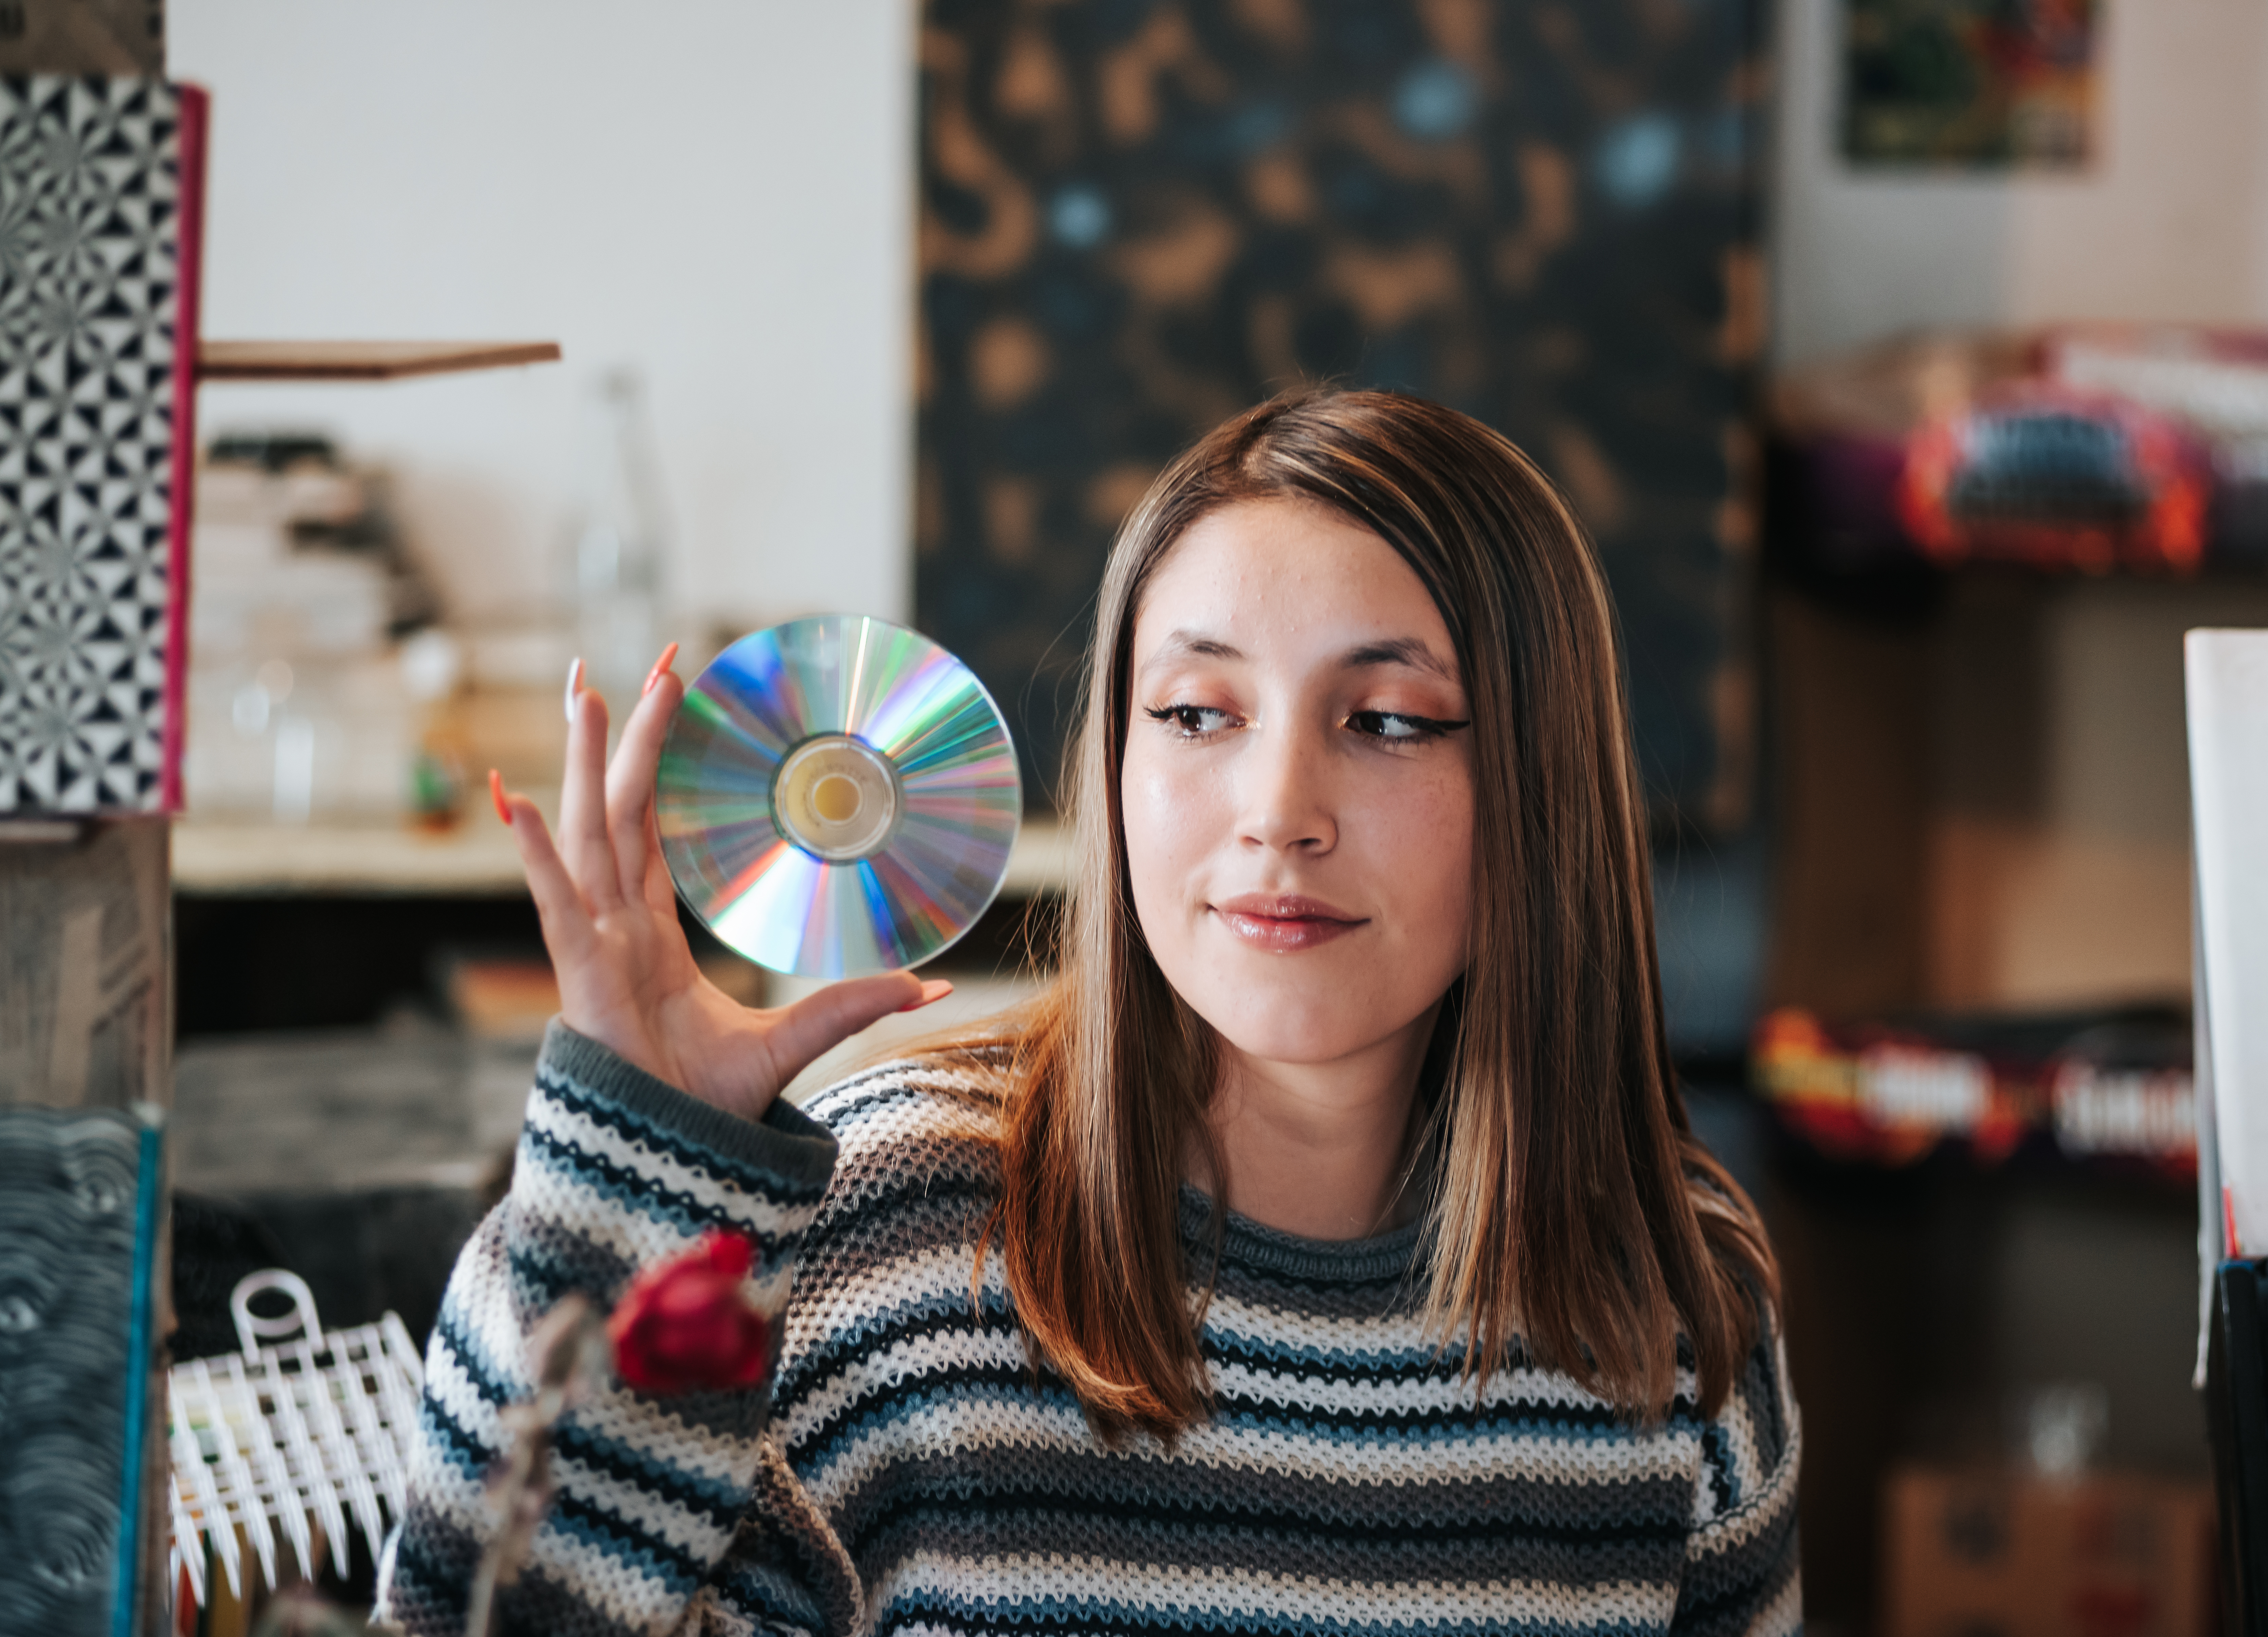 A young woman holding a CD. | Source: Getty Images